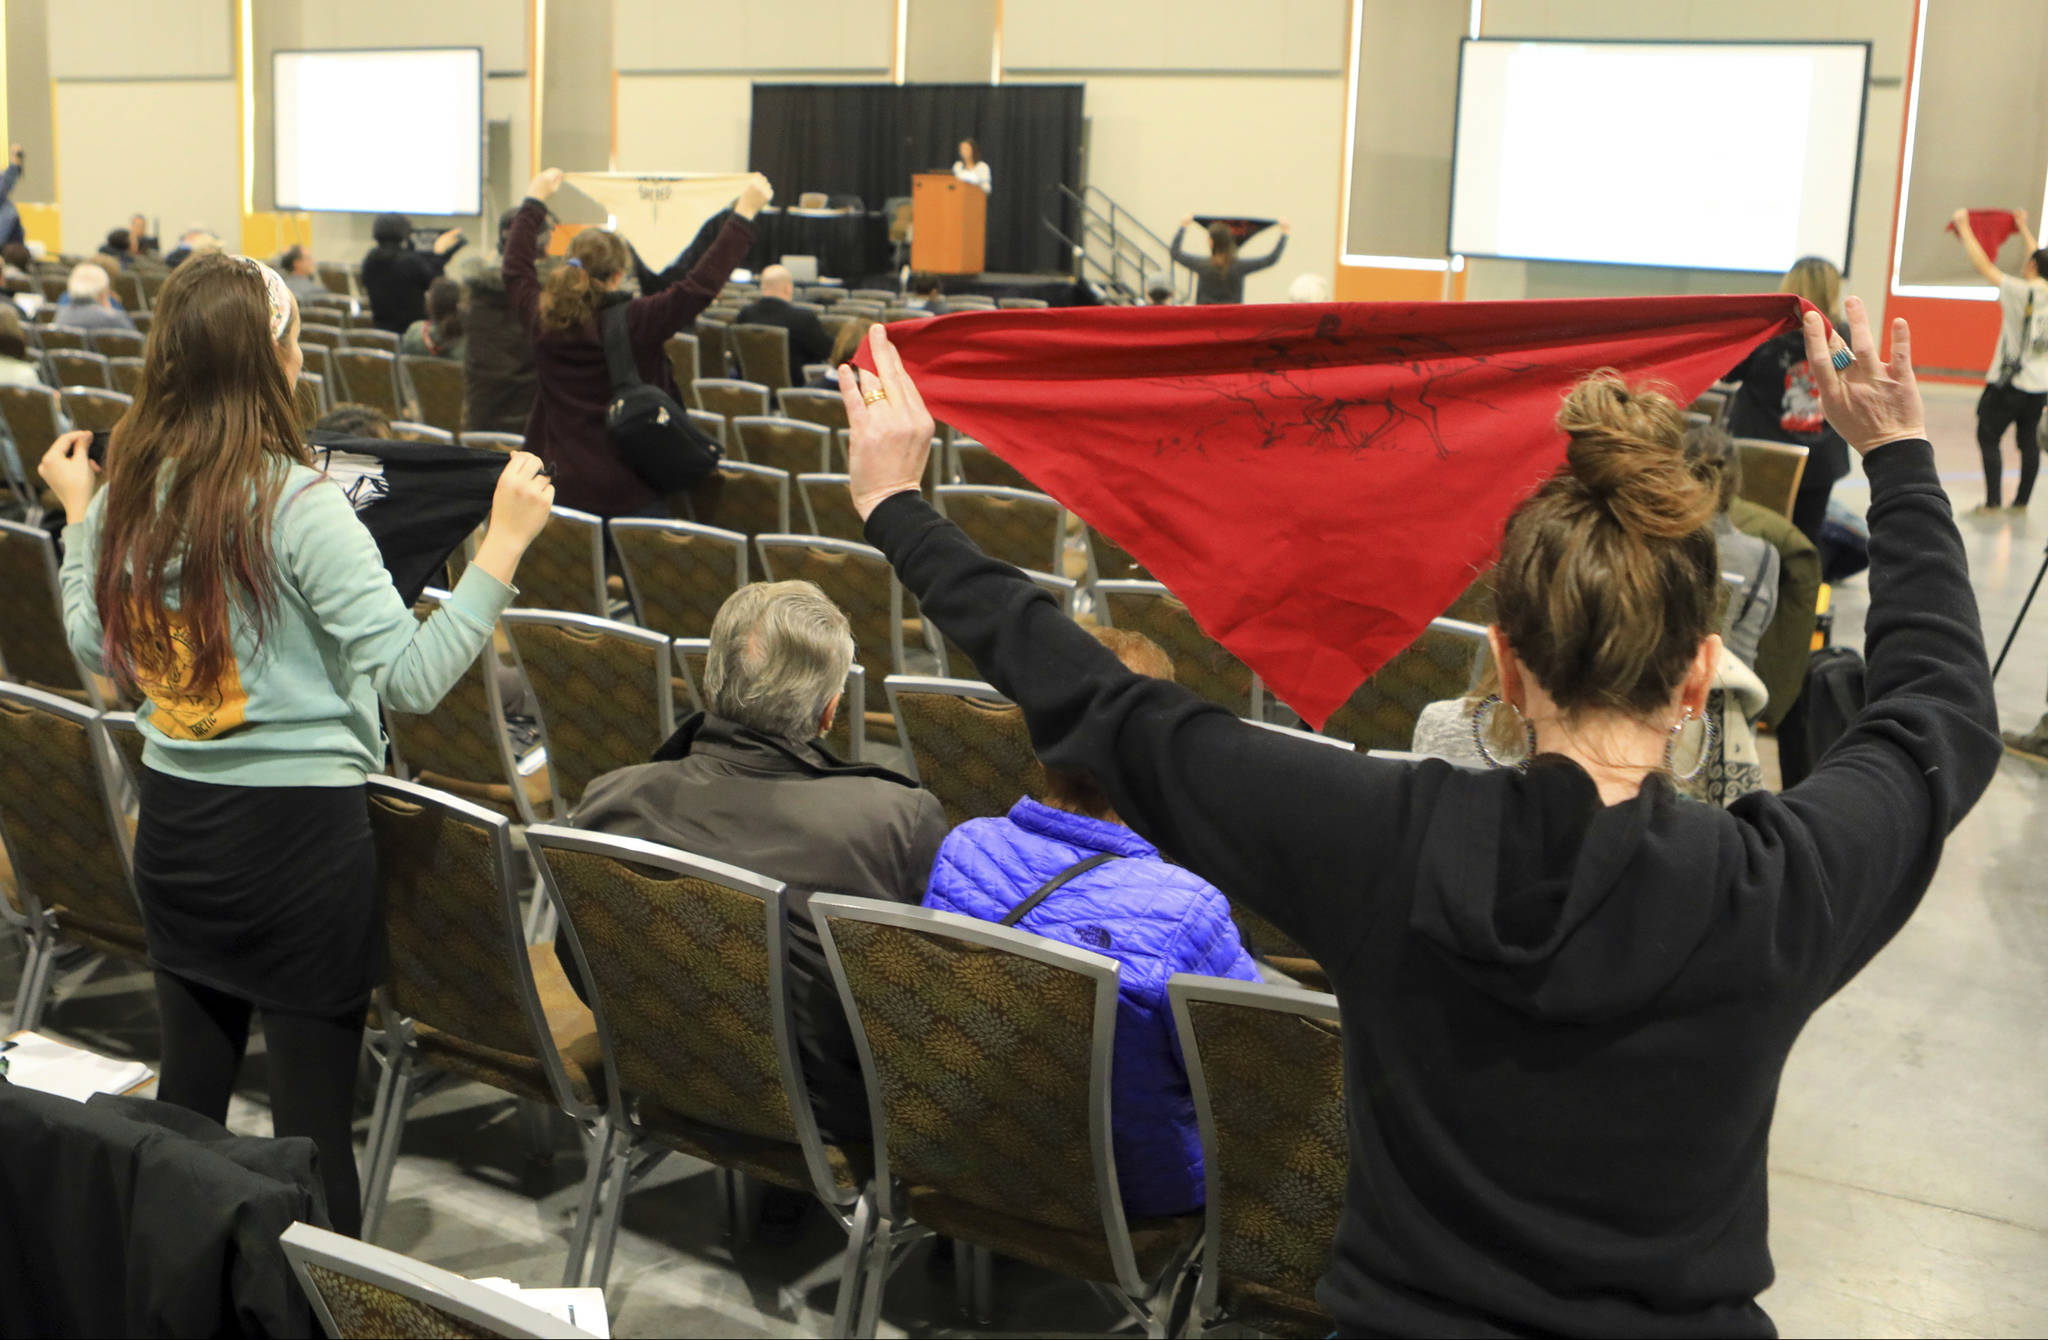 Protesters hold up flags during a public hearing on a draft environmental plan on proposed petroleum leasing within Alaska’s Arctic National Wildlife Refuge on Monday, in Anchorage. Congress in December 2017 approved a tax bill that requires oil and gas lease sales in the refuge to raise revenue for a tax cut backed by President Donald Trump. (AP Photo/Dan Joling)